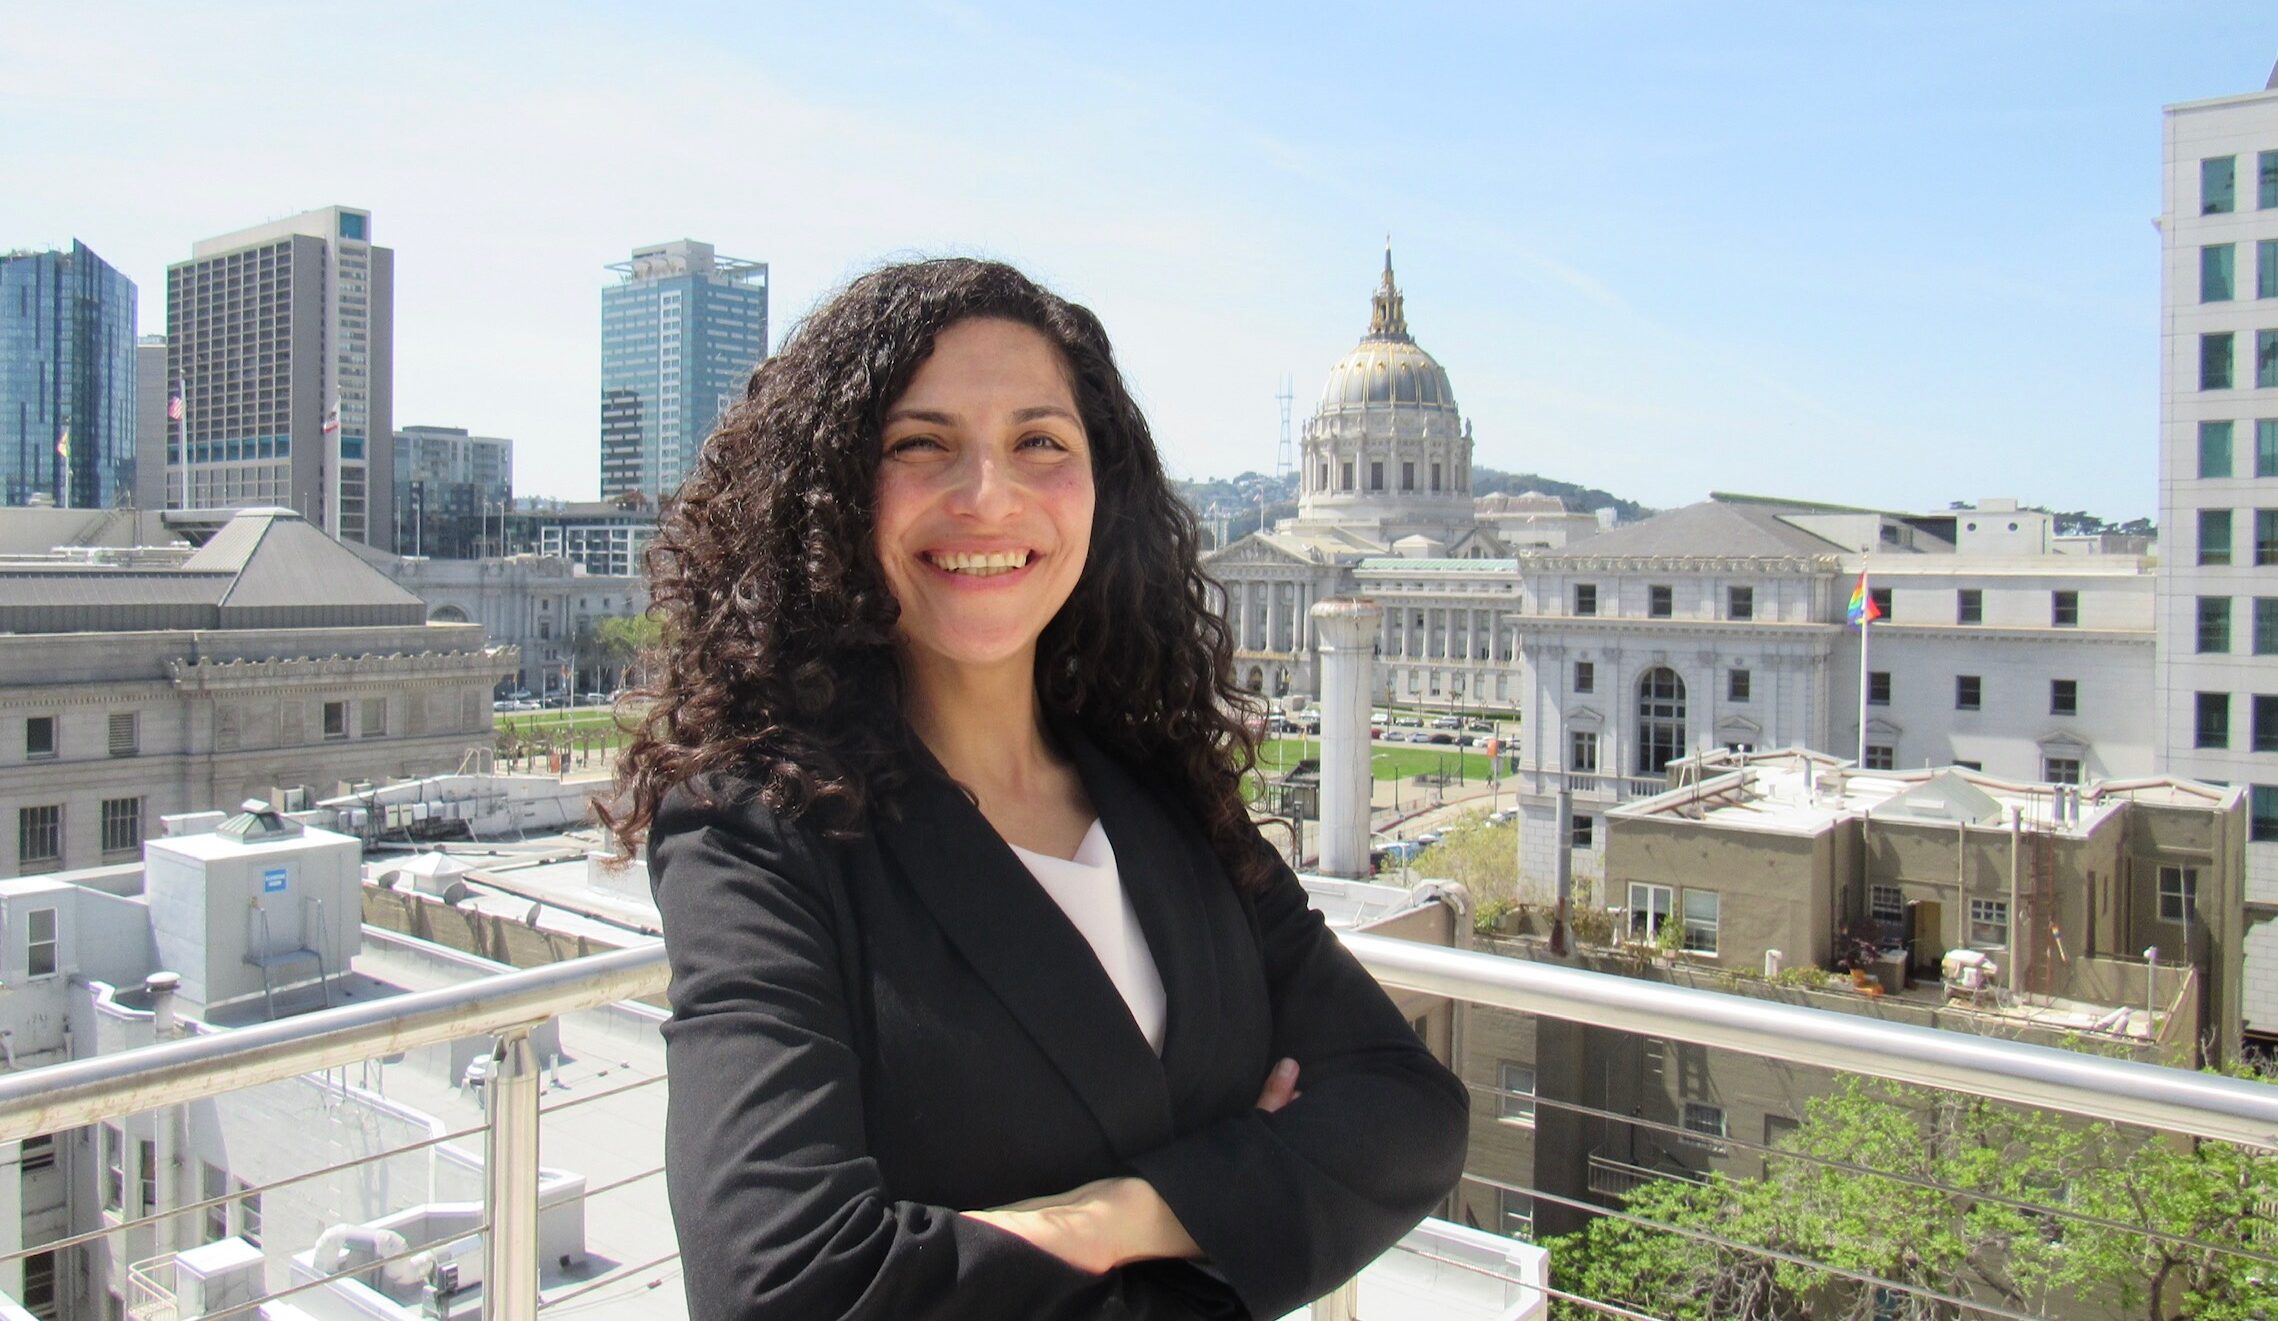 UC Law SF studen Rosamaria Cavalho poses with San Francisco City Hall in the background